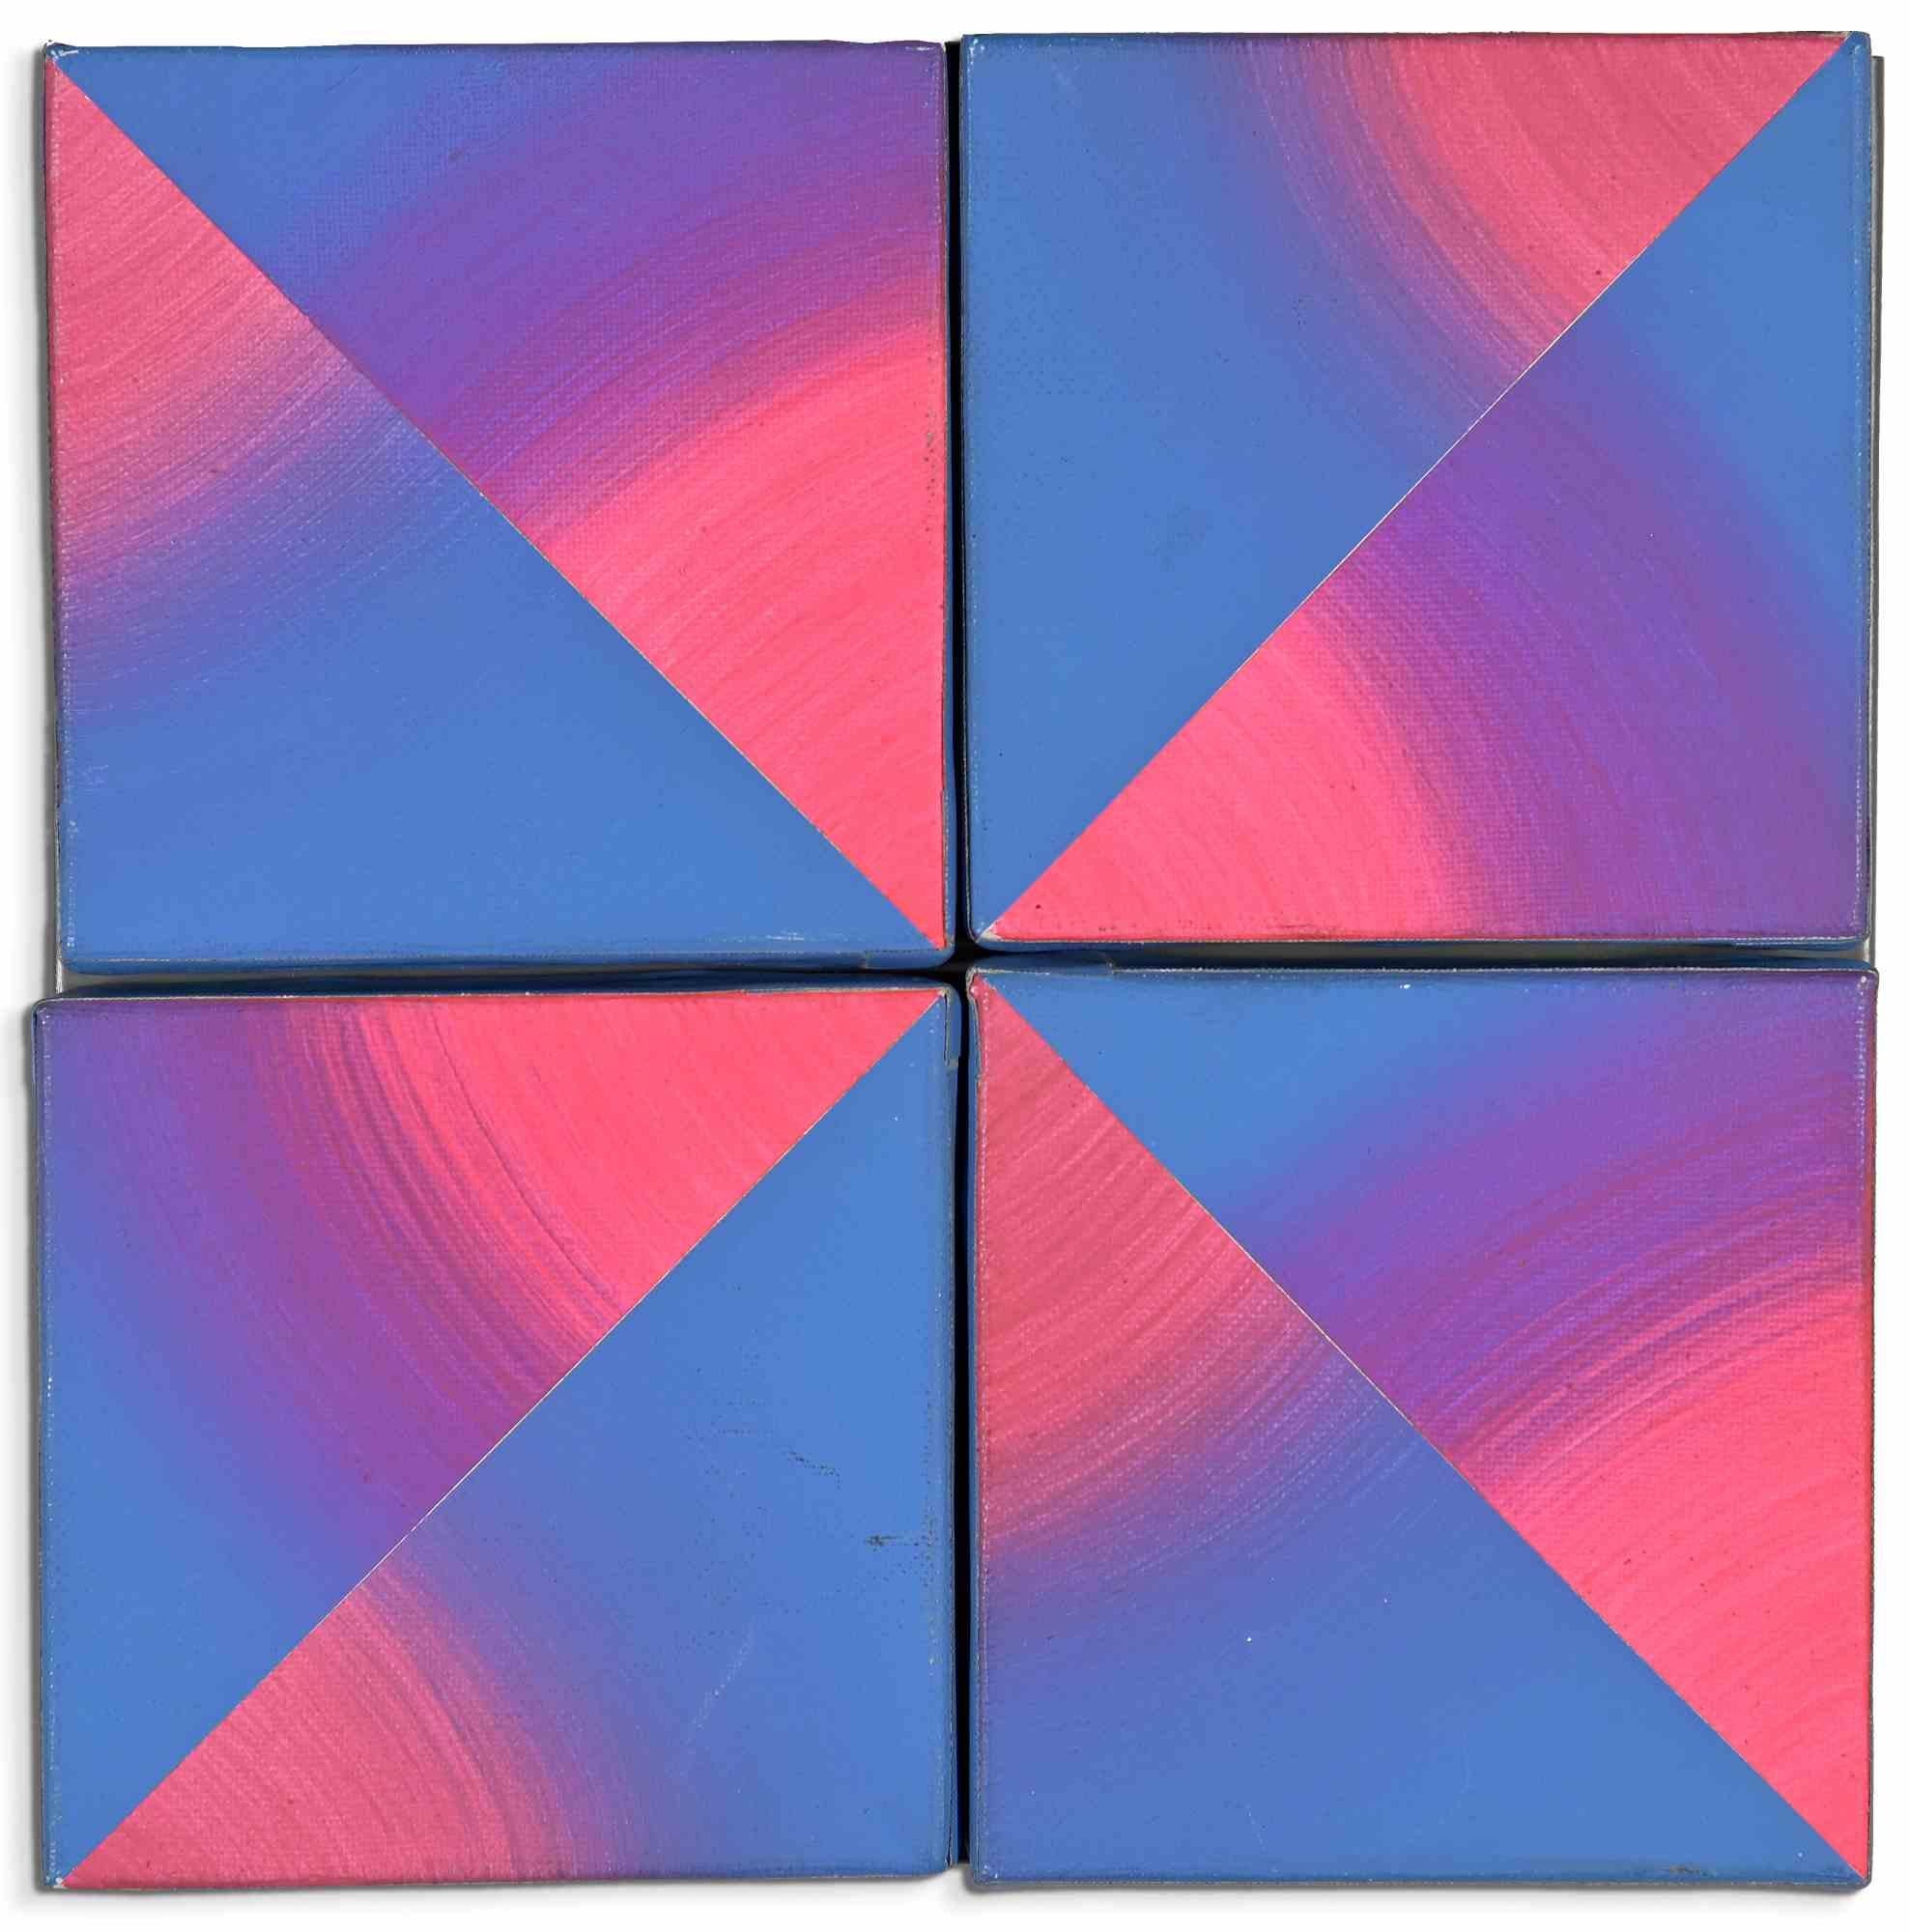 Elena Fia Fozzer, Irradiant Chromosectorial.

Acrylics on four canvases applied and positioned with magnets on a metal panel, 1989.

Signature on the back of each canvas

Artist's signature, date and label on the back of the panel

Arte Struktura